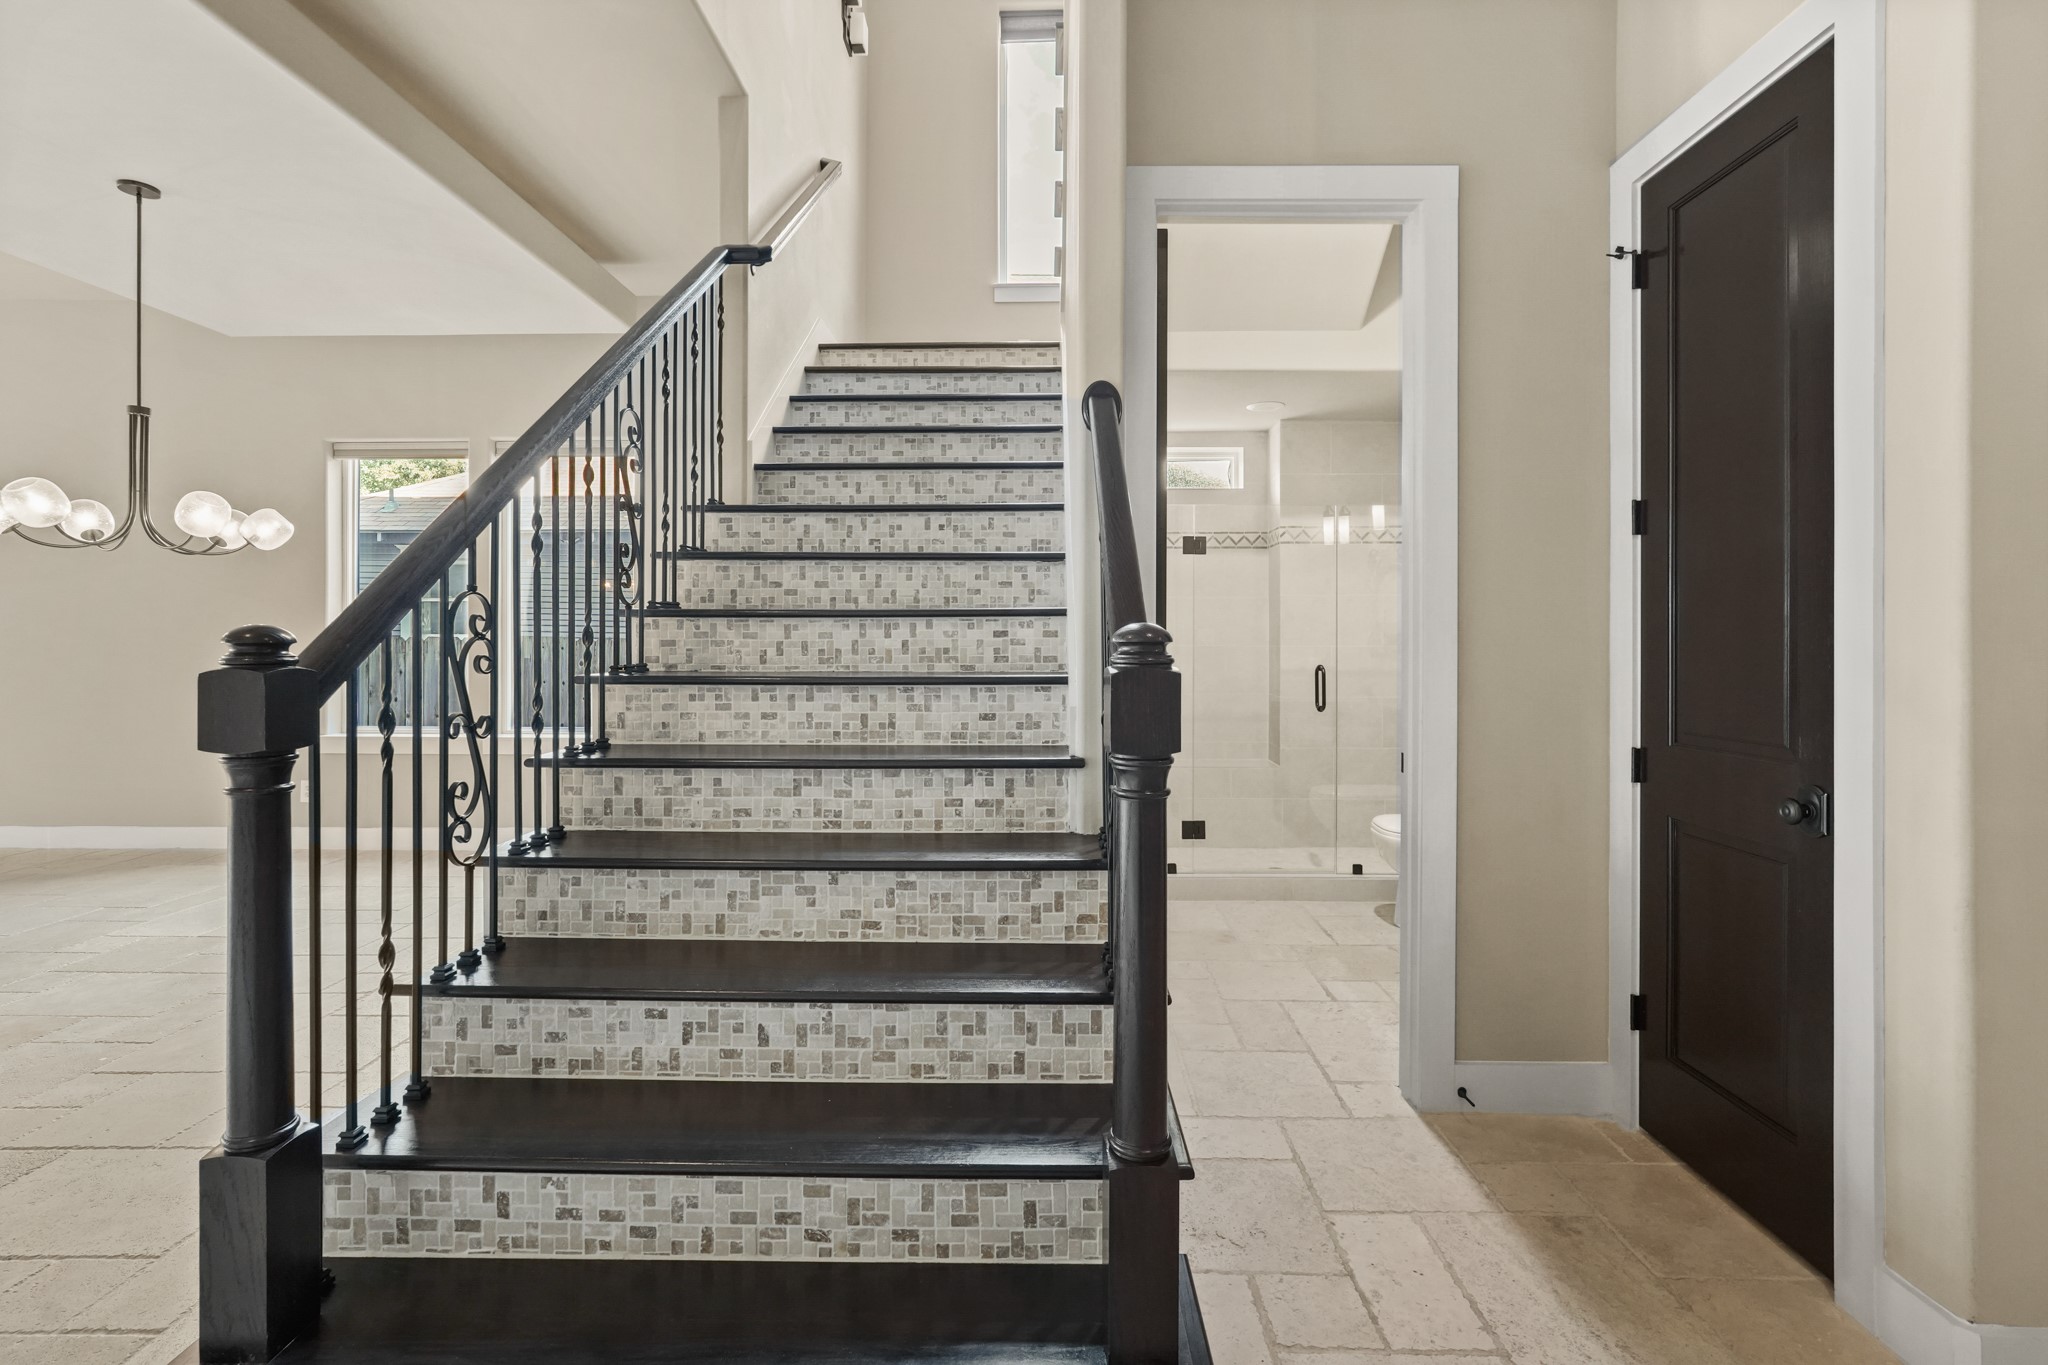 Reach the second floor via this breathtaking custom tile and wood stairway.